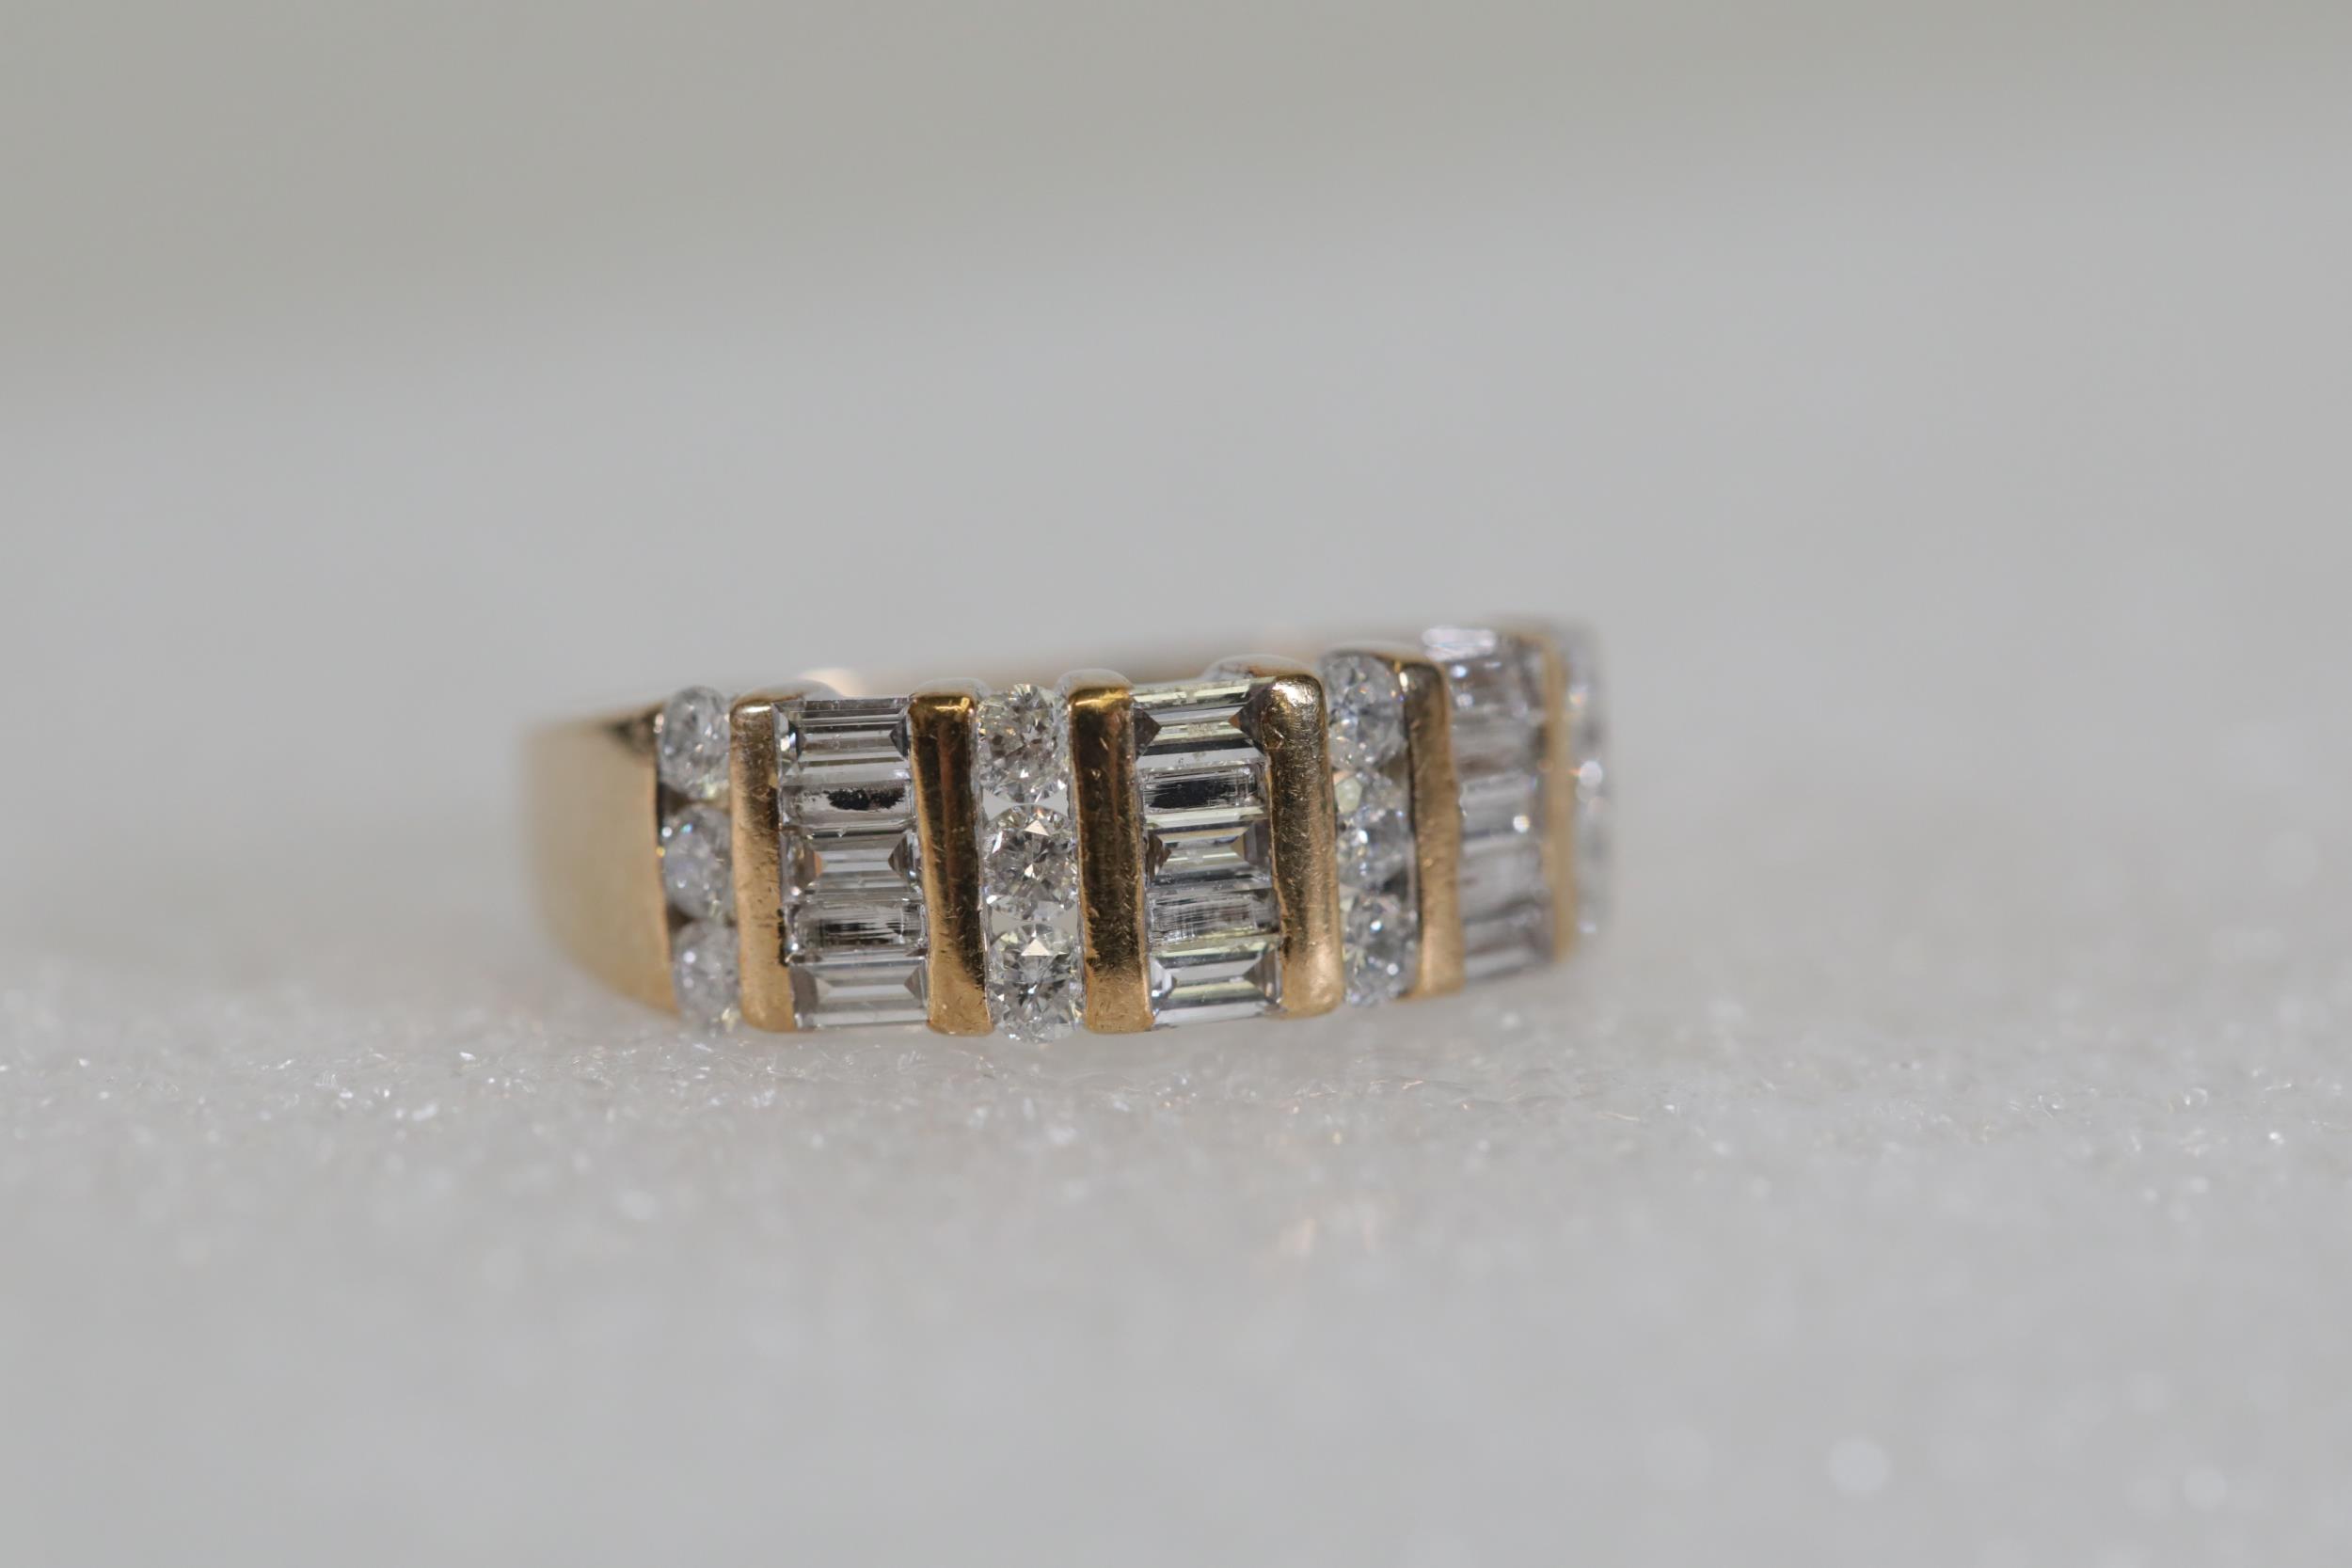 9CT Yellow and White Gold Multi Stone Diamond Ring - Image 9 of 13